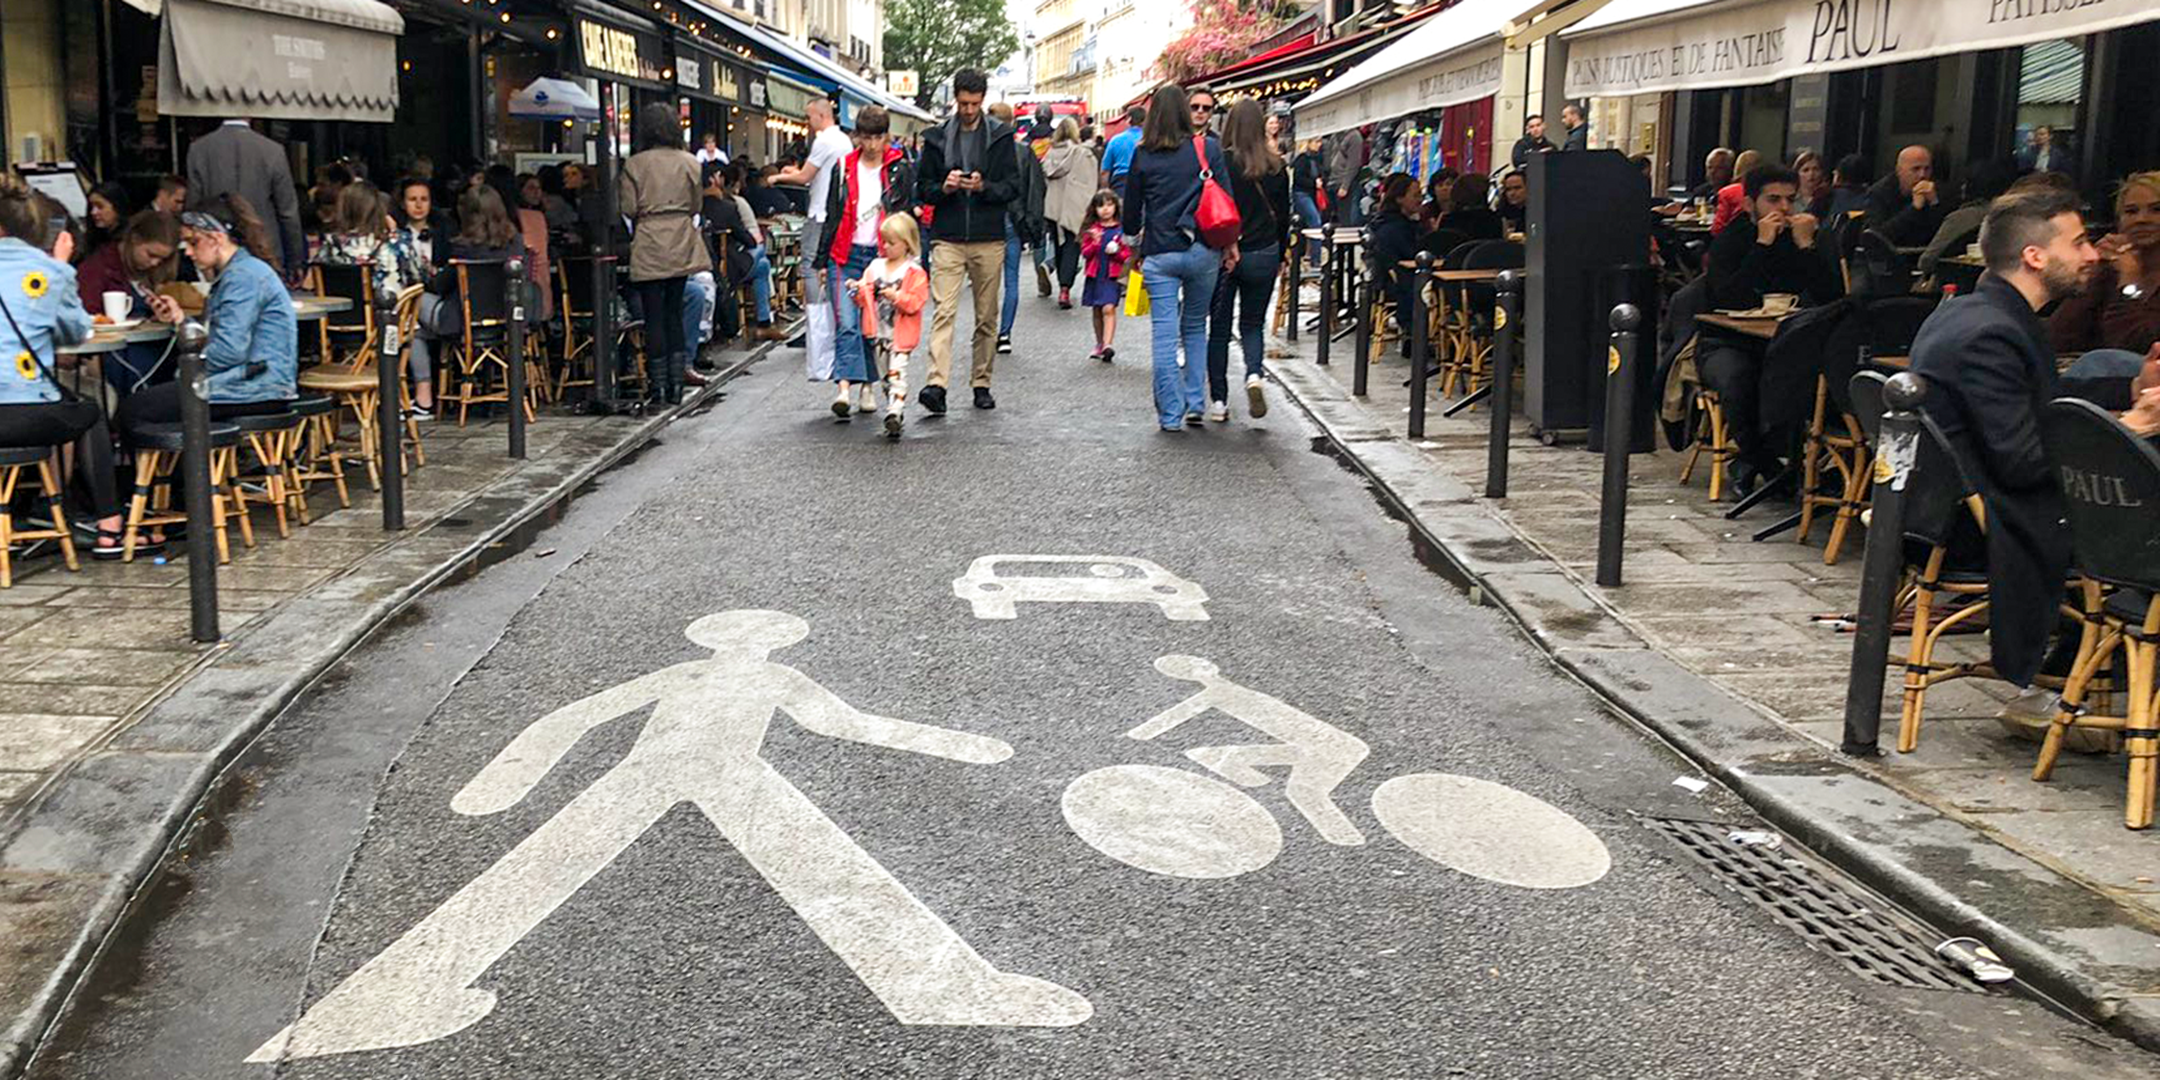 Shared street priorities marked on pavement